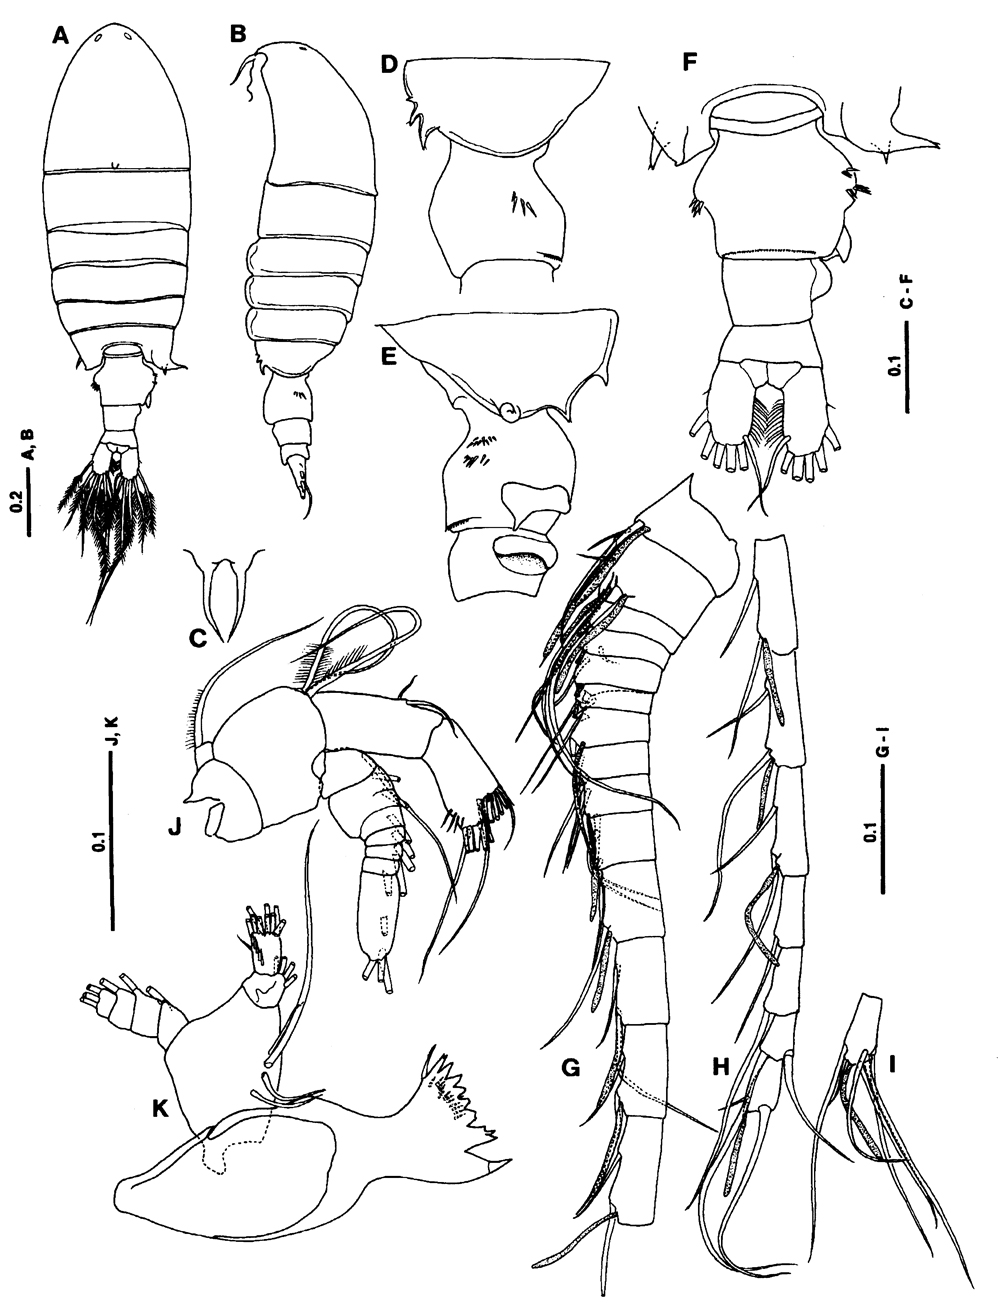 Species Centropages brevifurcus - Plate 3 of morphological figures